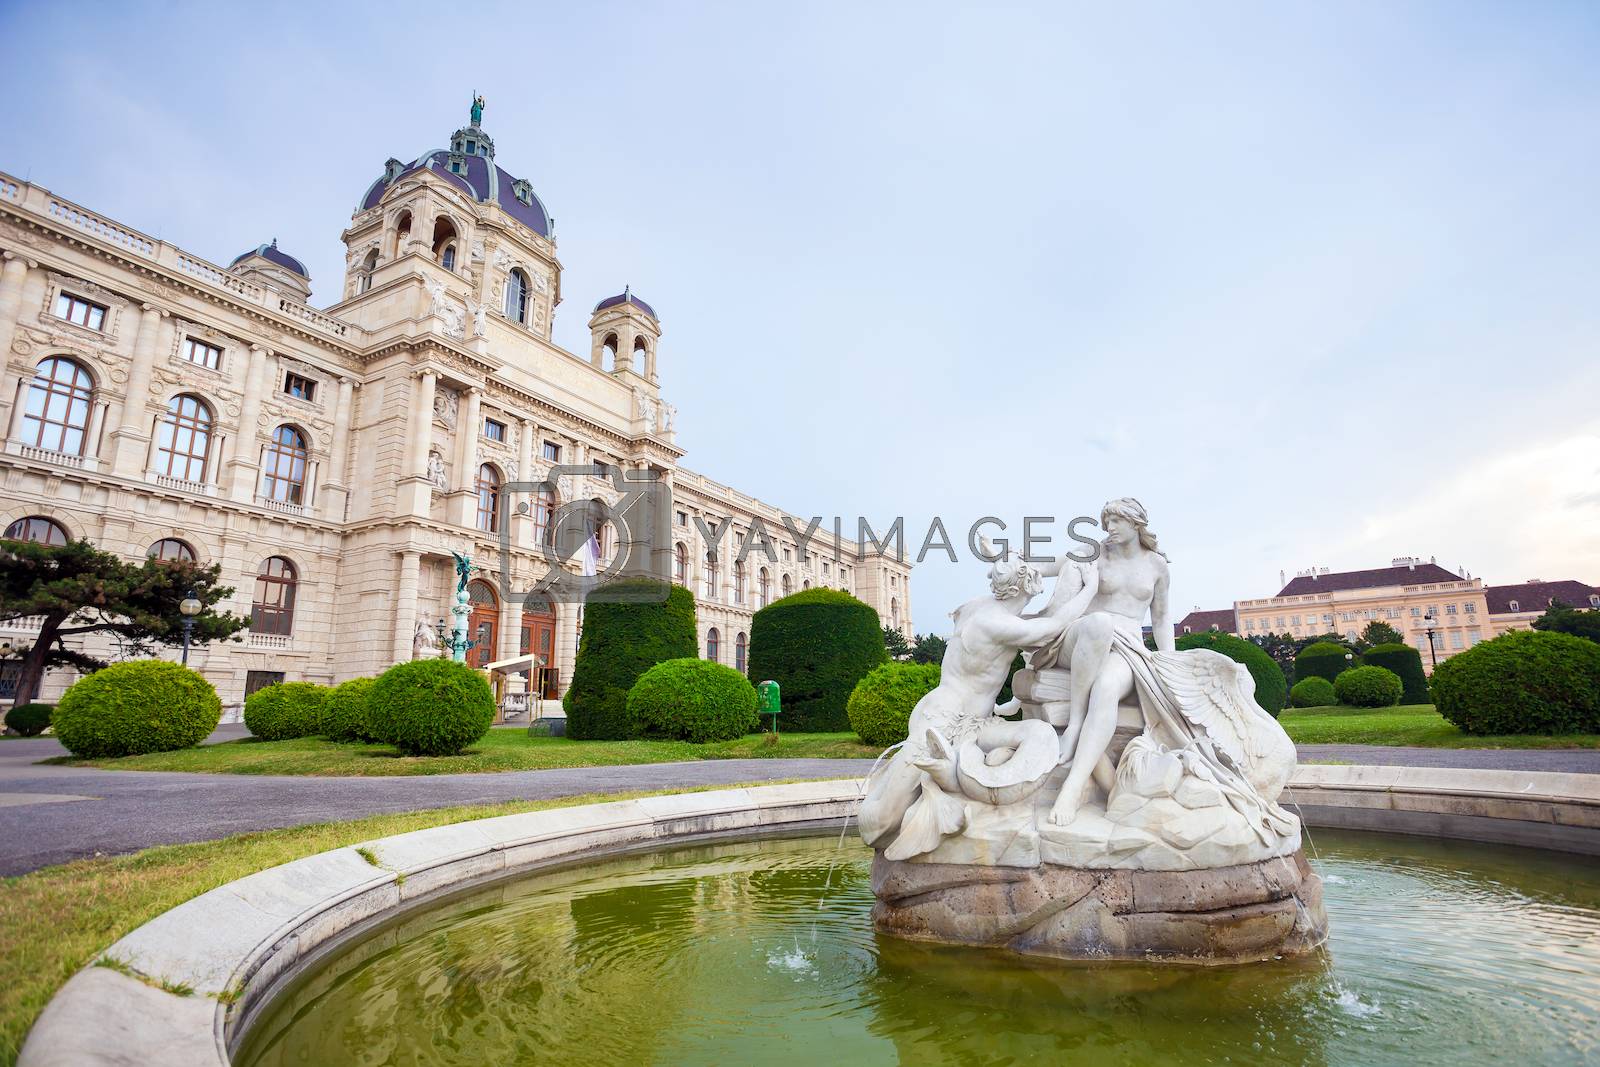 Royalty free image of Museum of Fine Arts (Kunsthistorisches Museum), Vienna, Austria by PixAchi